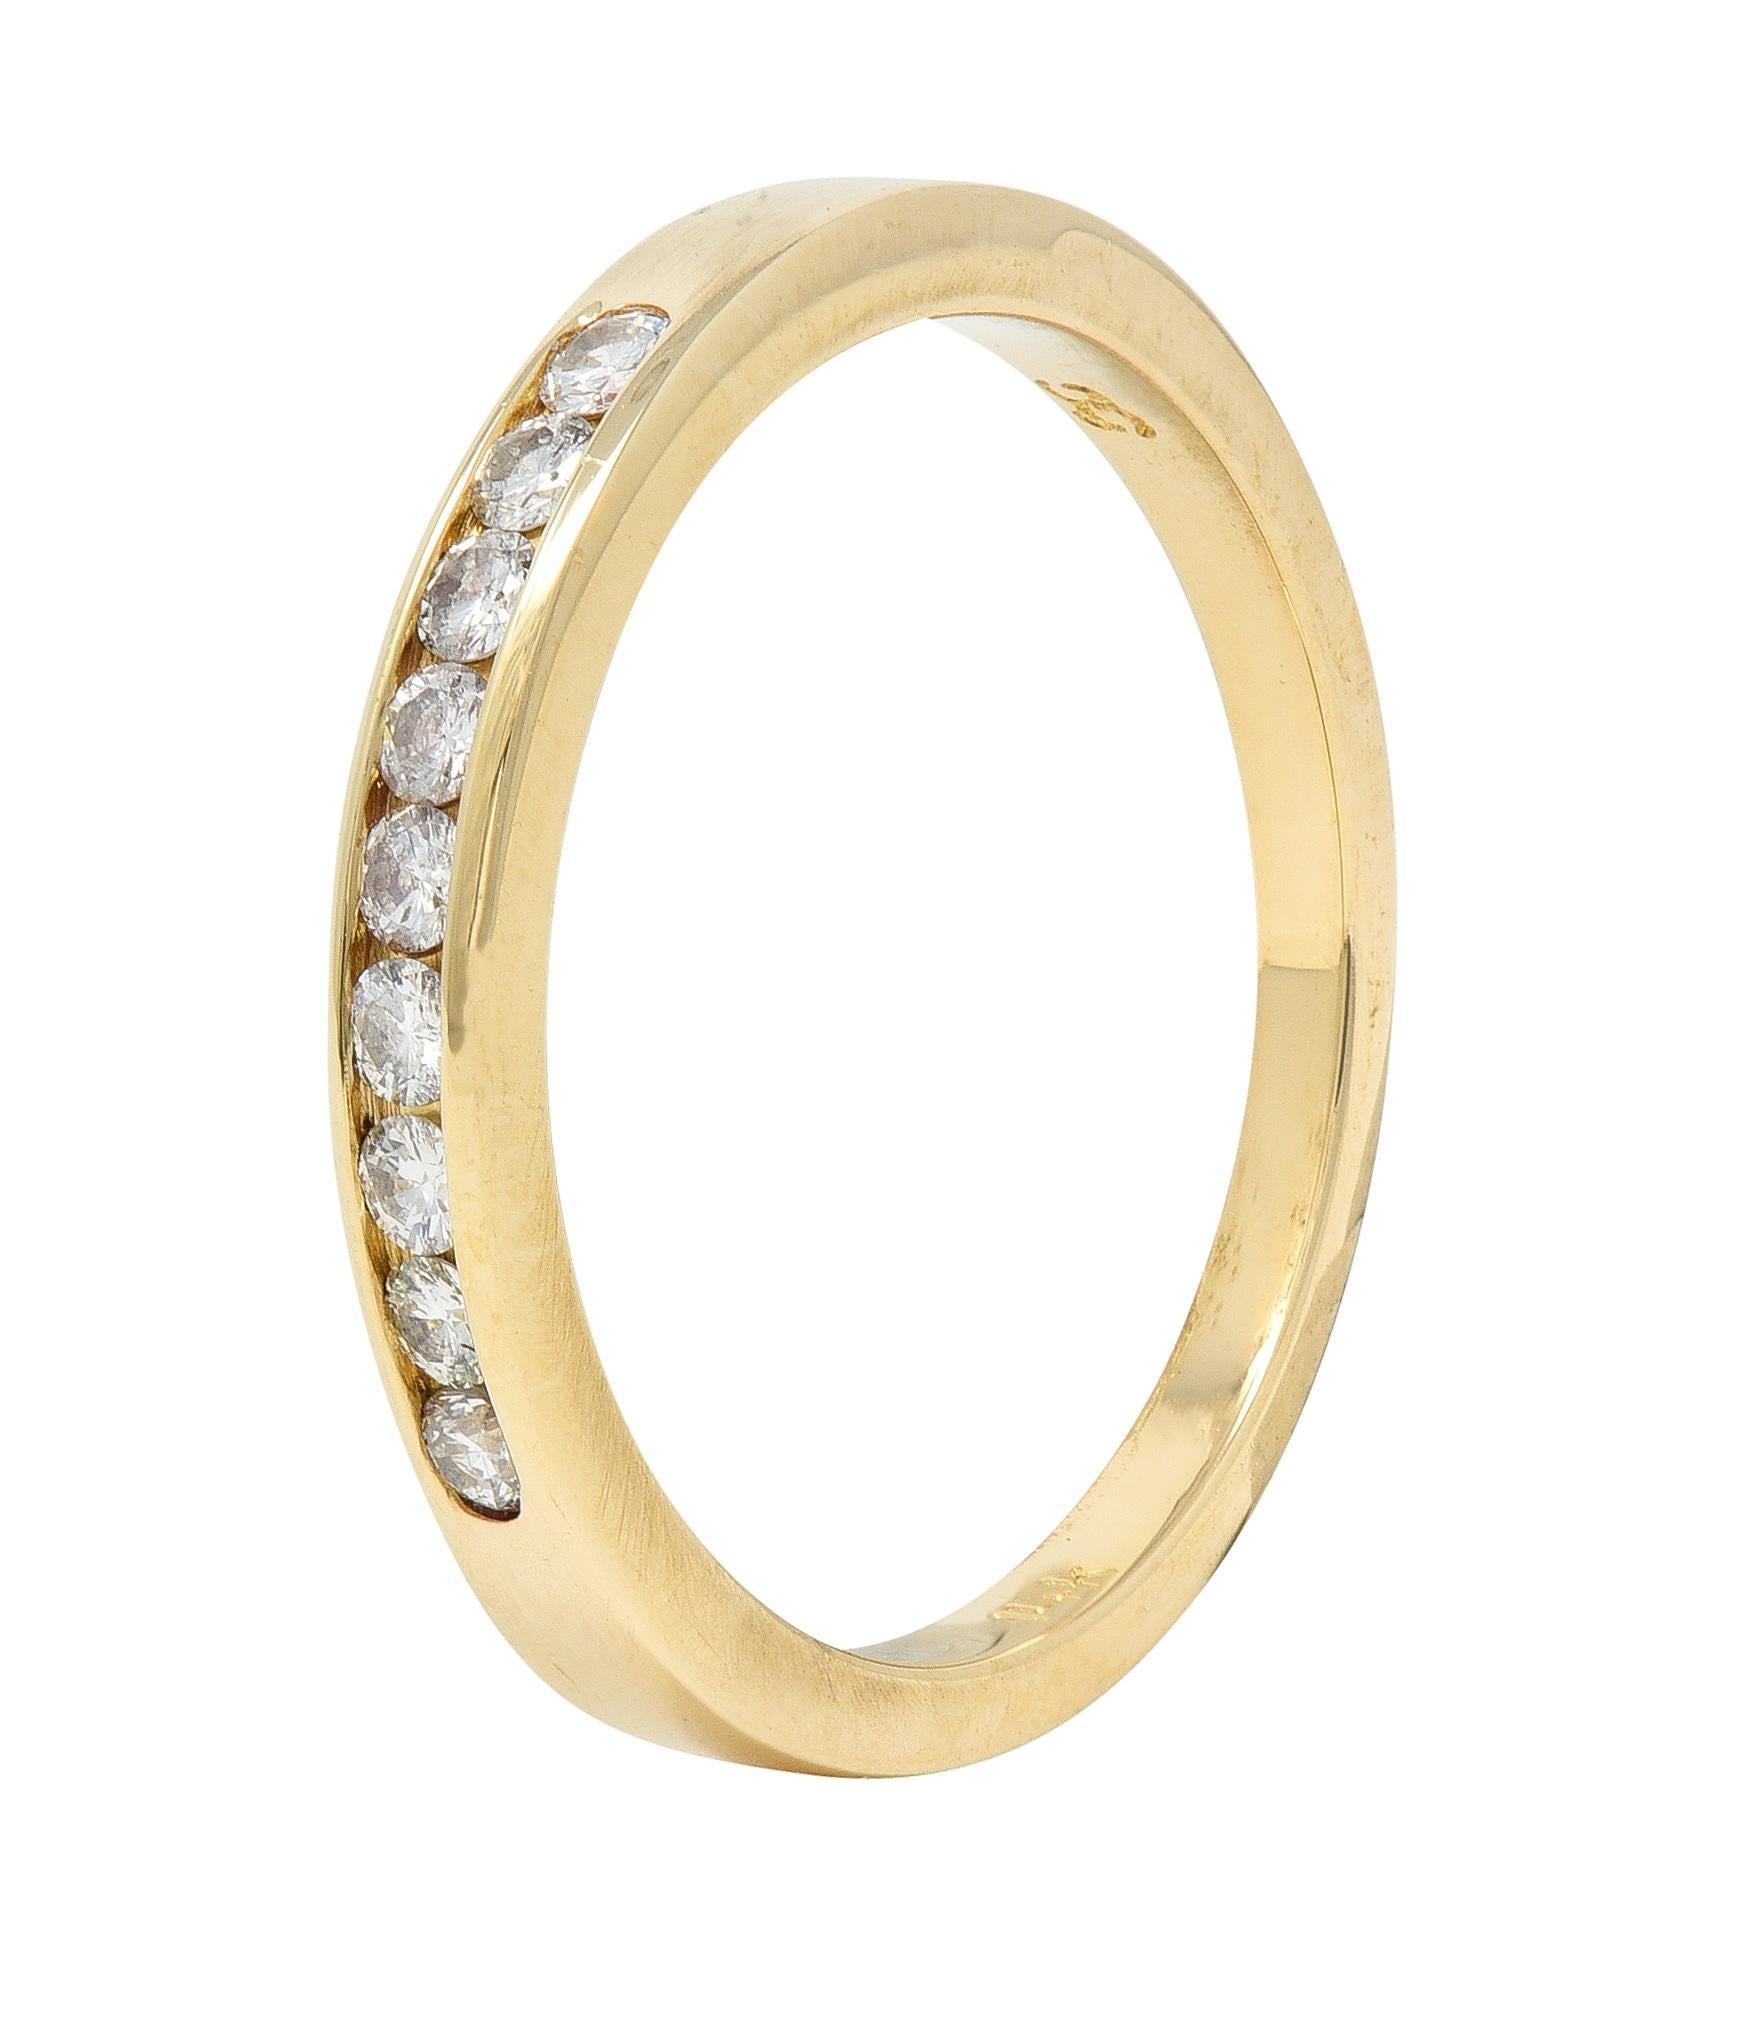 Featuring round brilliant cut diamonds channel set to front 
Weighing approximately 0.27 carat total 
G/H color with VS2 clarity
Completed by high polish finish
Stamped for 14 karat gold
With maker's mark
Circa: 1990s
Ring size: 5 3/4 and sizable